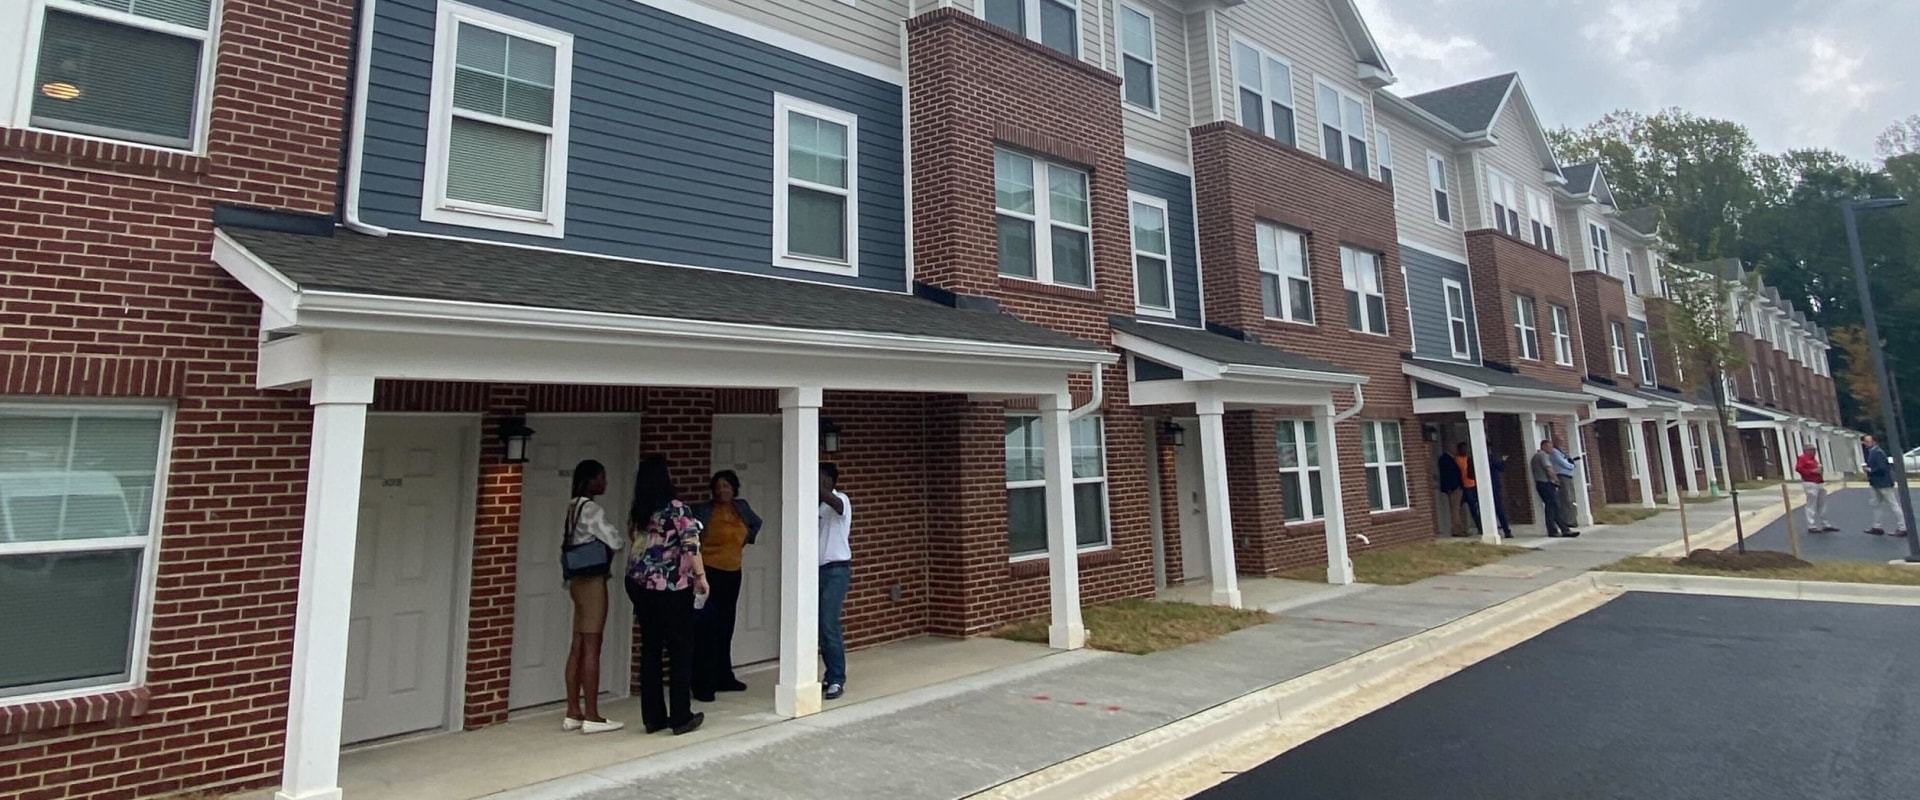 Finding Affordable Housing in Prince George's County